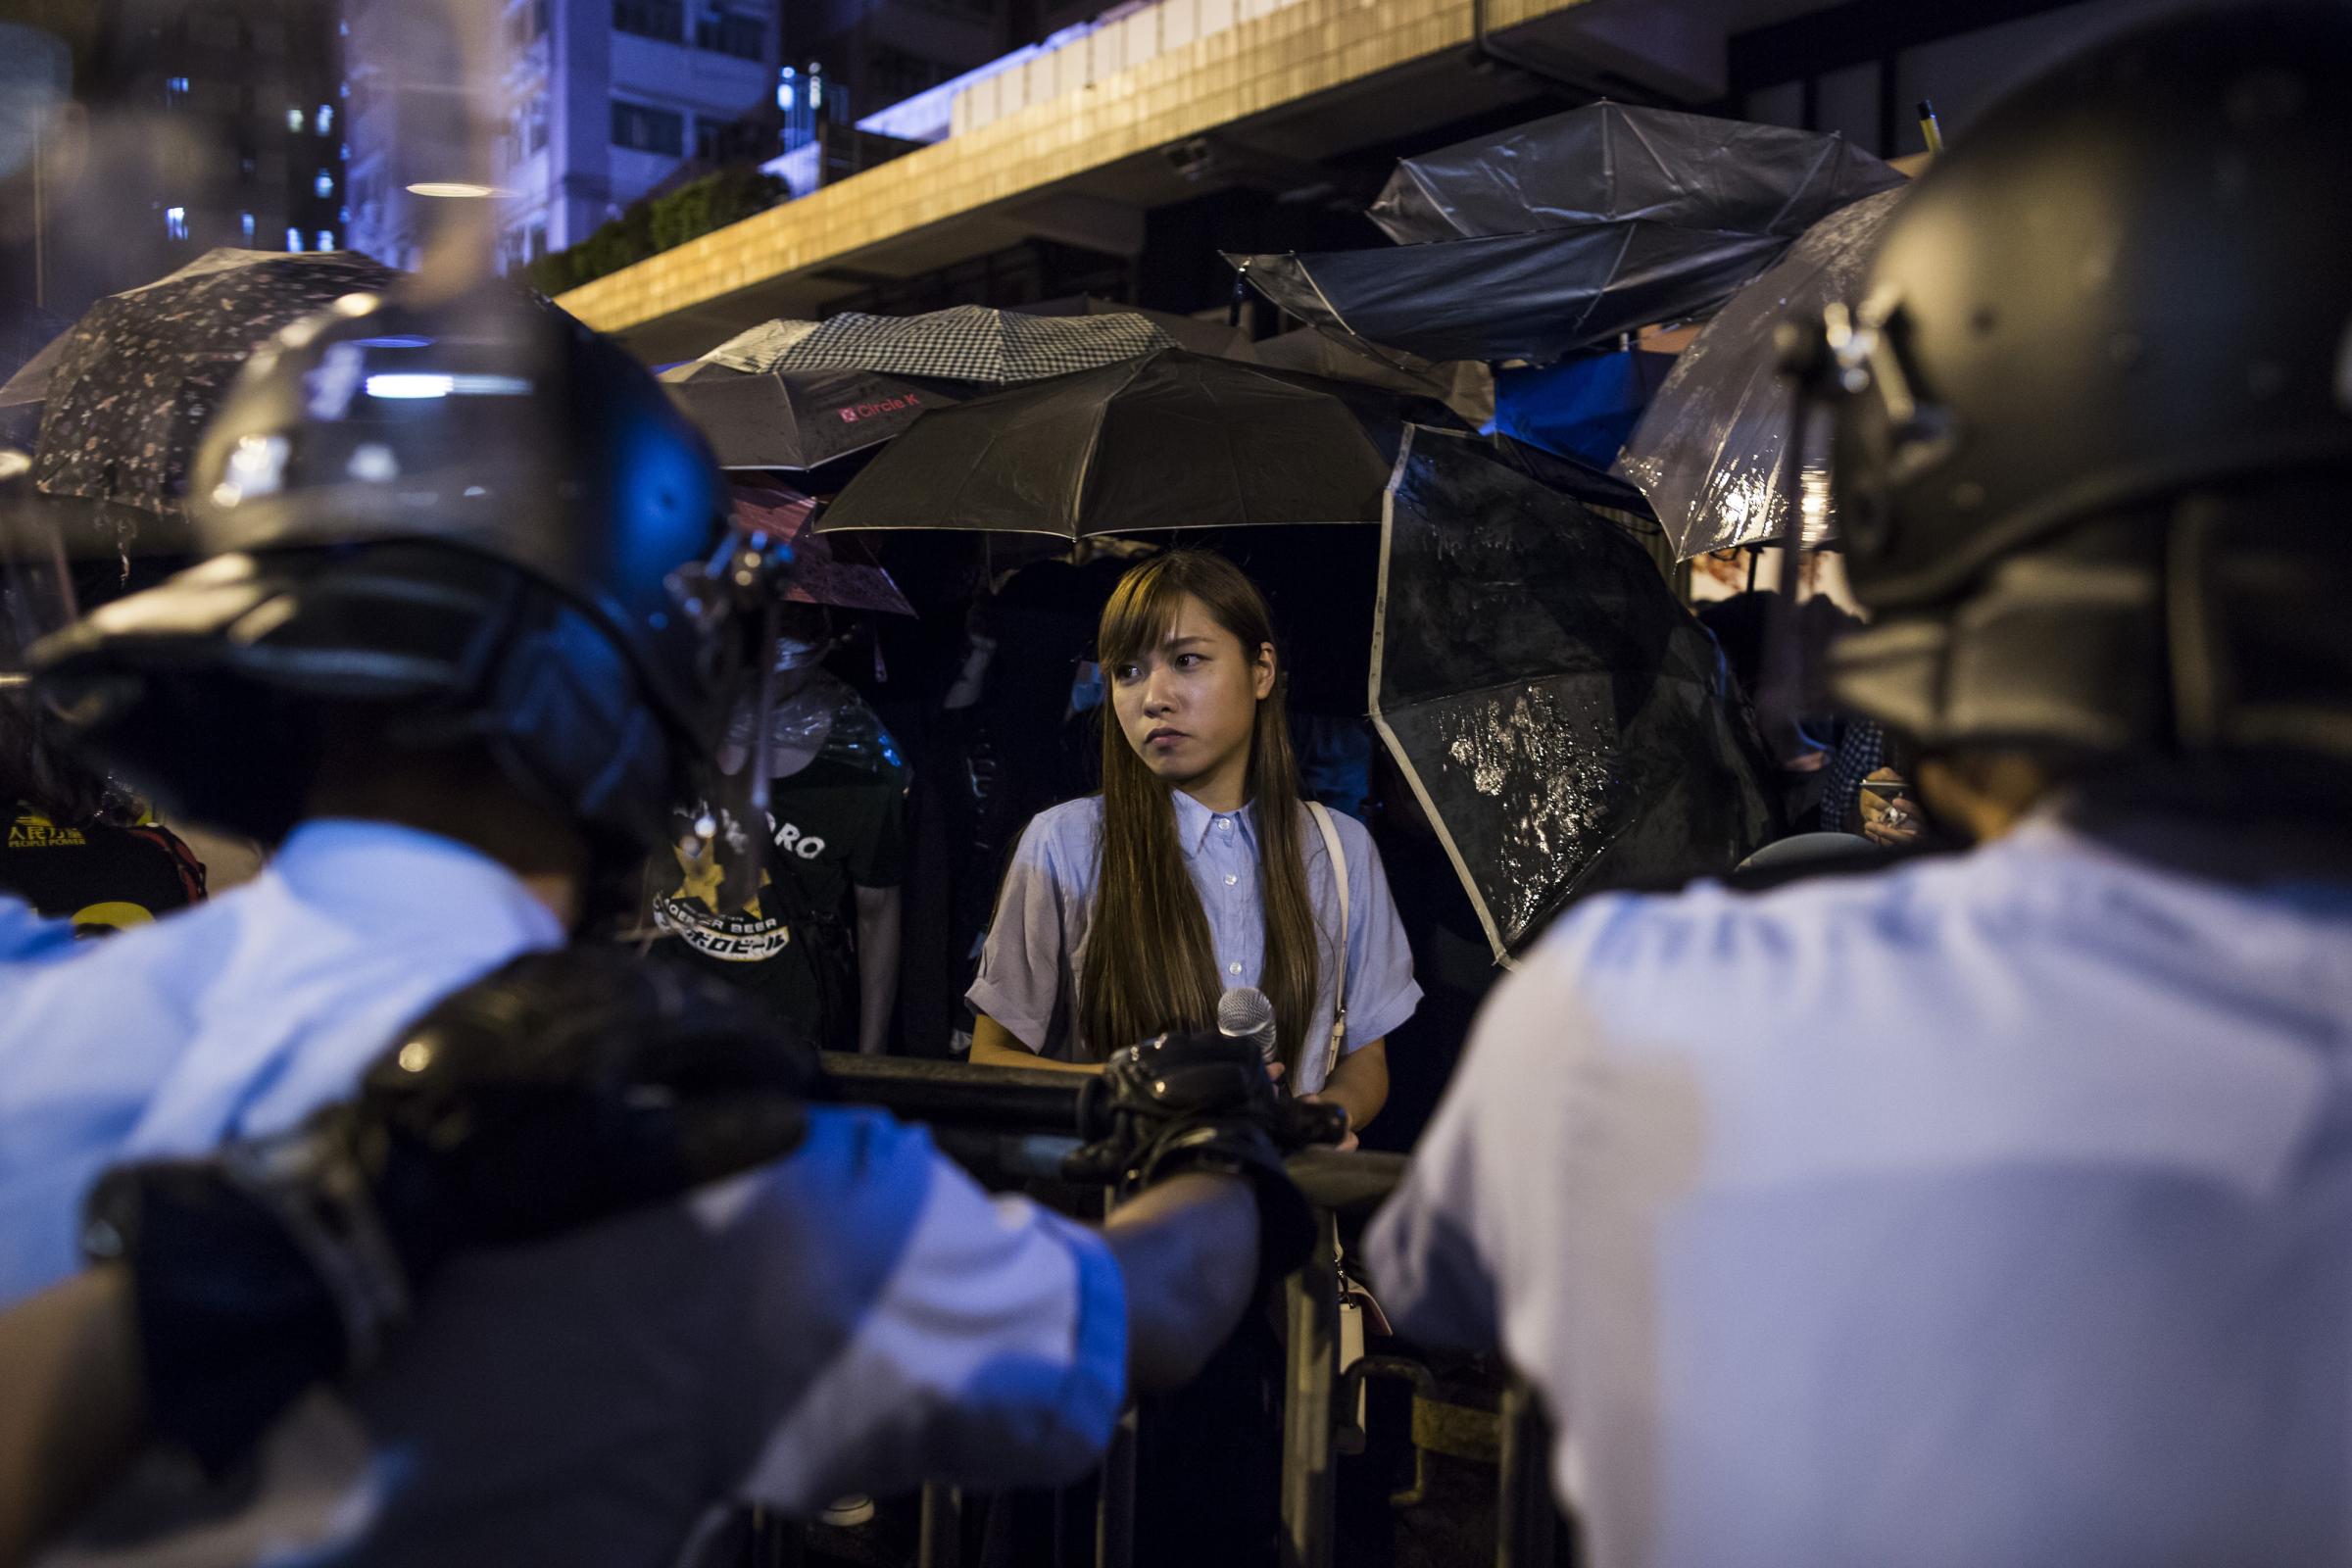 Thousands Protest In Hong Kong As China Mulls Change To City Law